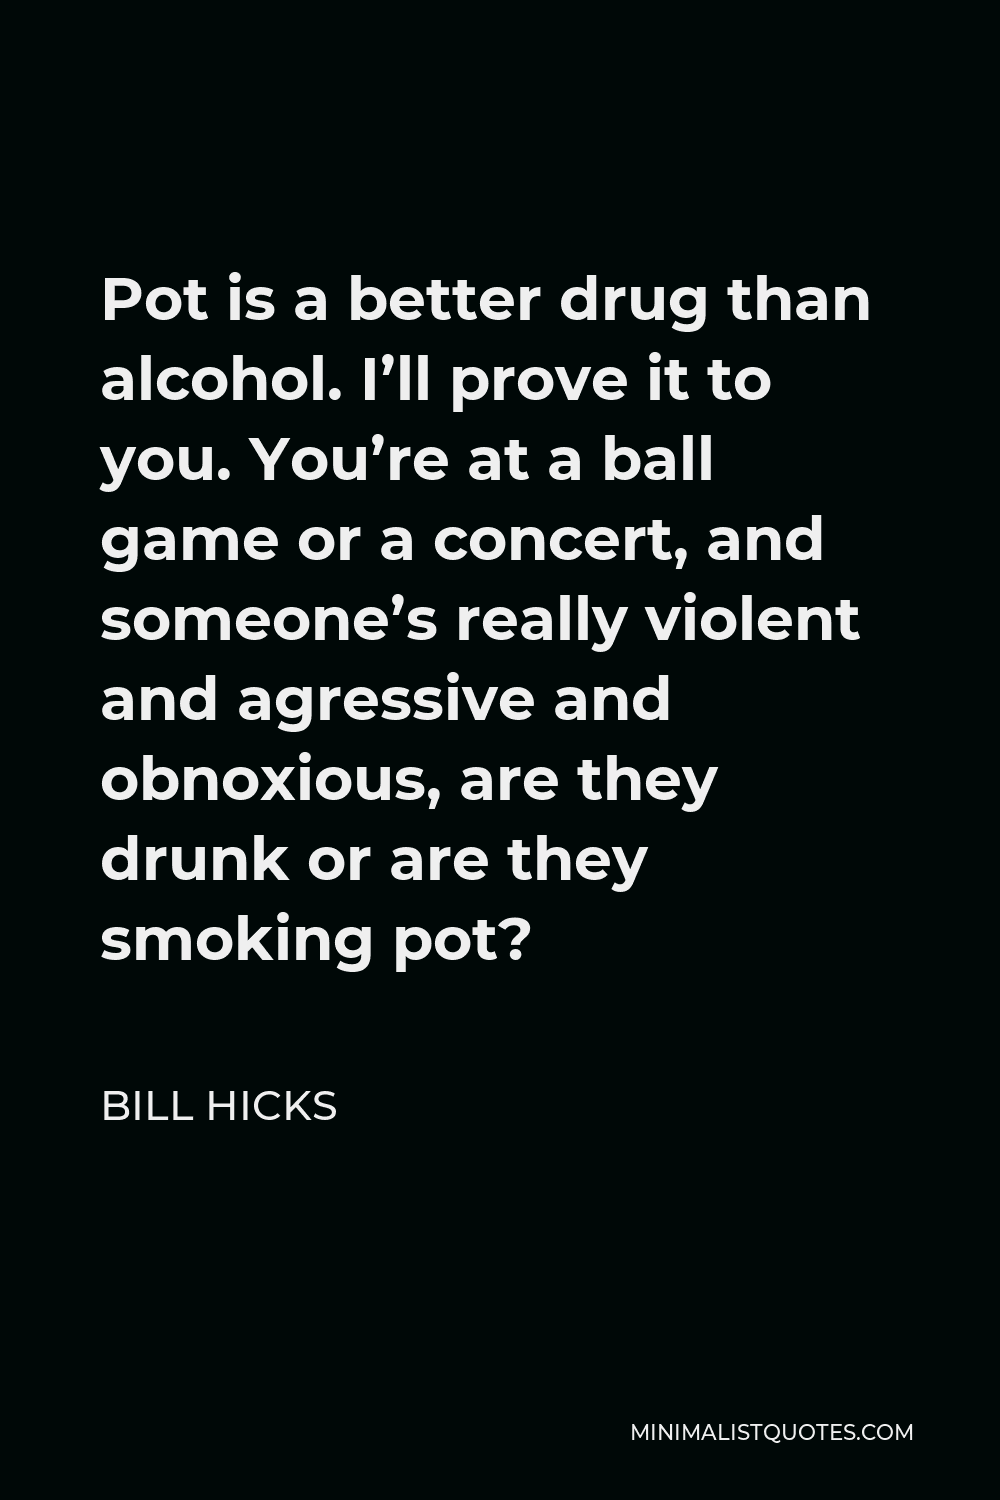 Bill Hicks Quote - Pot is a better drug than alcohol. I’ll prove it to you. You’re at a ball game or a concert, and someone’s really violent and agressive and obnoxious, are they drunk or are they smoking pot?